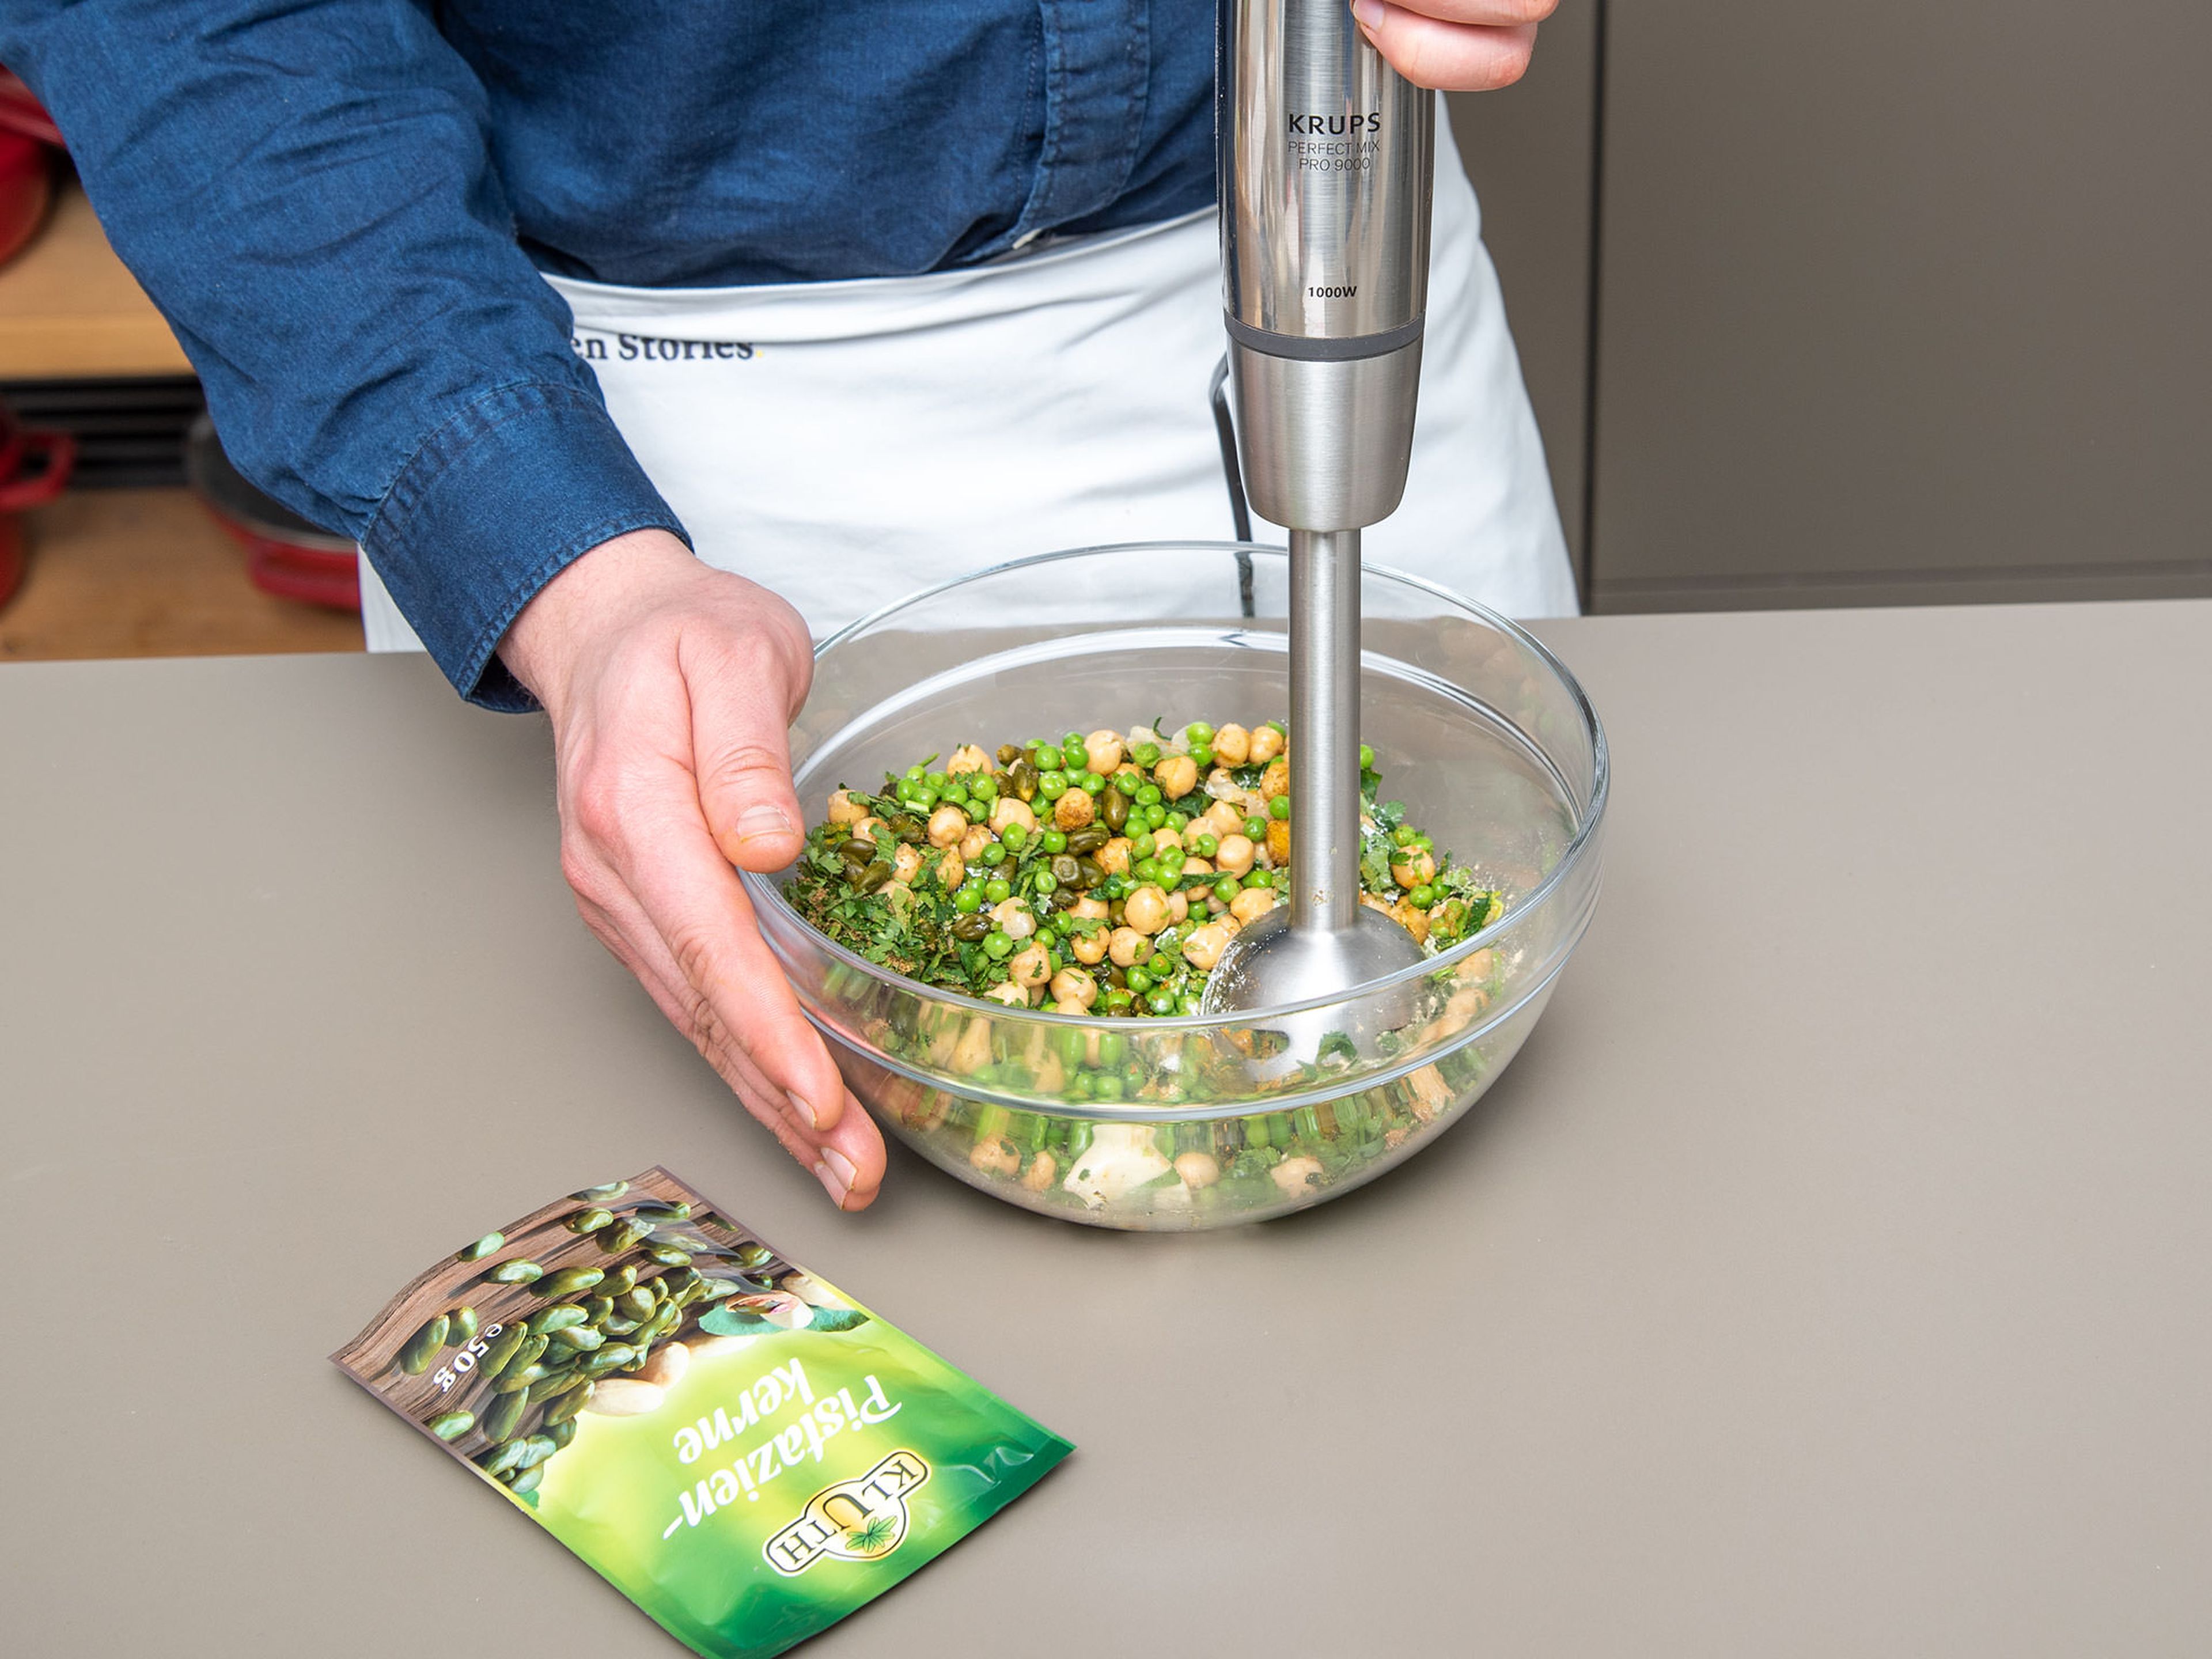 Add chickpeas, peas, garlic, half the chopped scallions, a pinch of chopped parsley, cilantro, half the mint, caraway, ras el hanout, lime zest, pistachios, vegetable oil, salt, and pepper to a large bowl. Purée with an immersion blender until well combined.